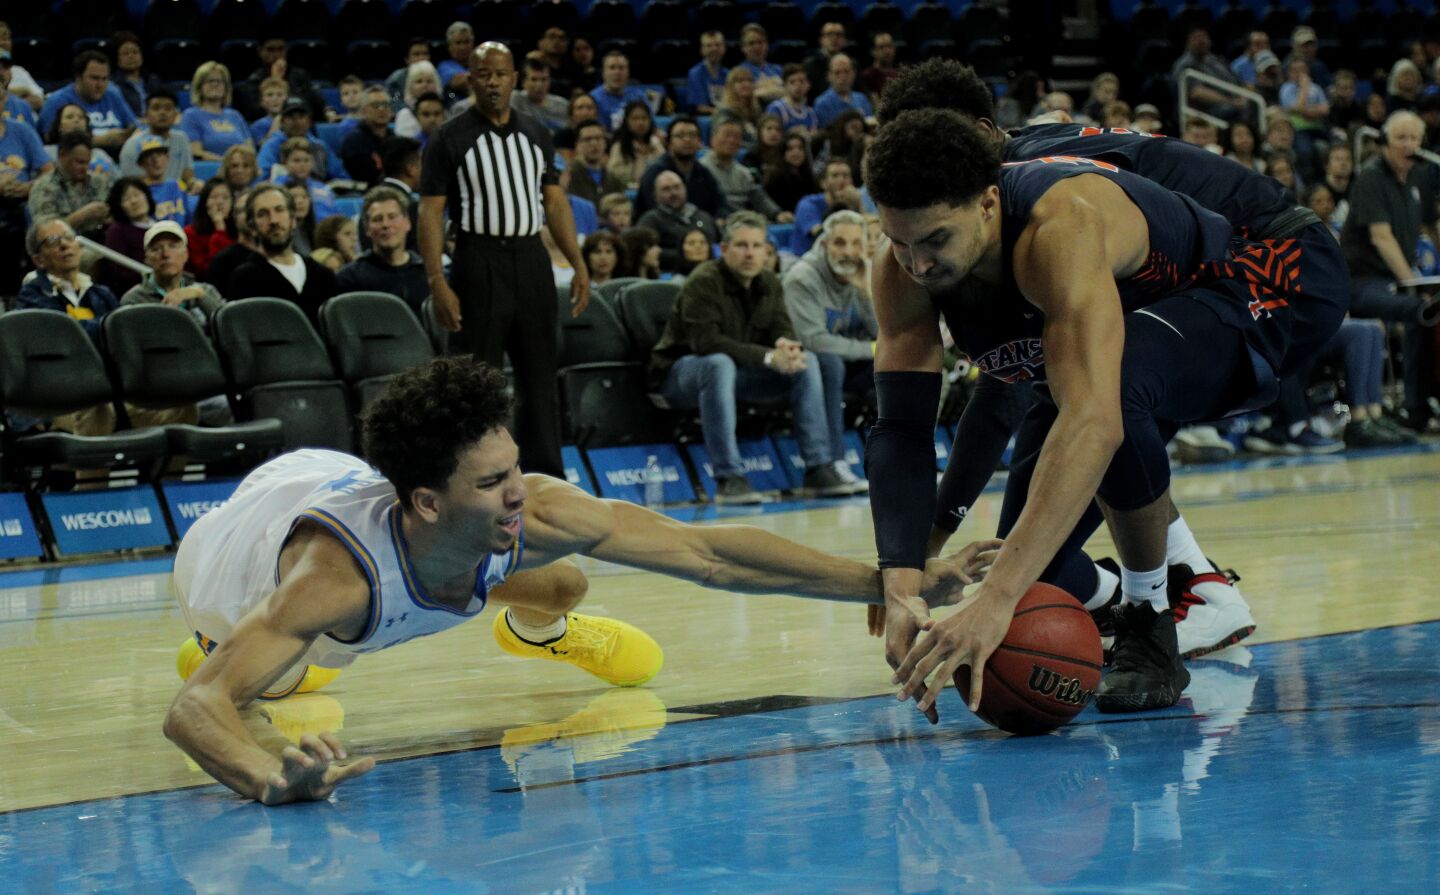 Bruins guard Jules Bernard loses the ball to Titans forward Jackson Rowe during a scramble in the second half.